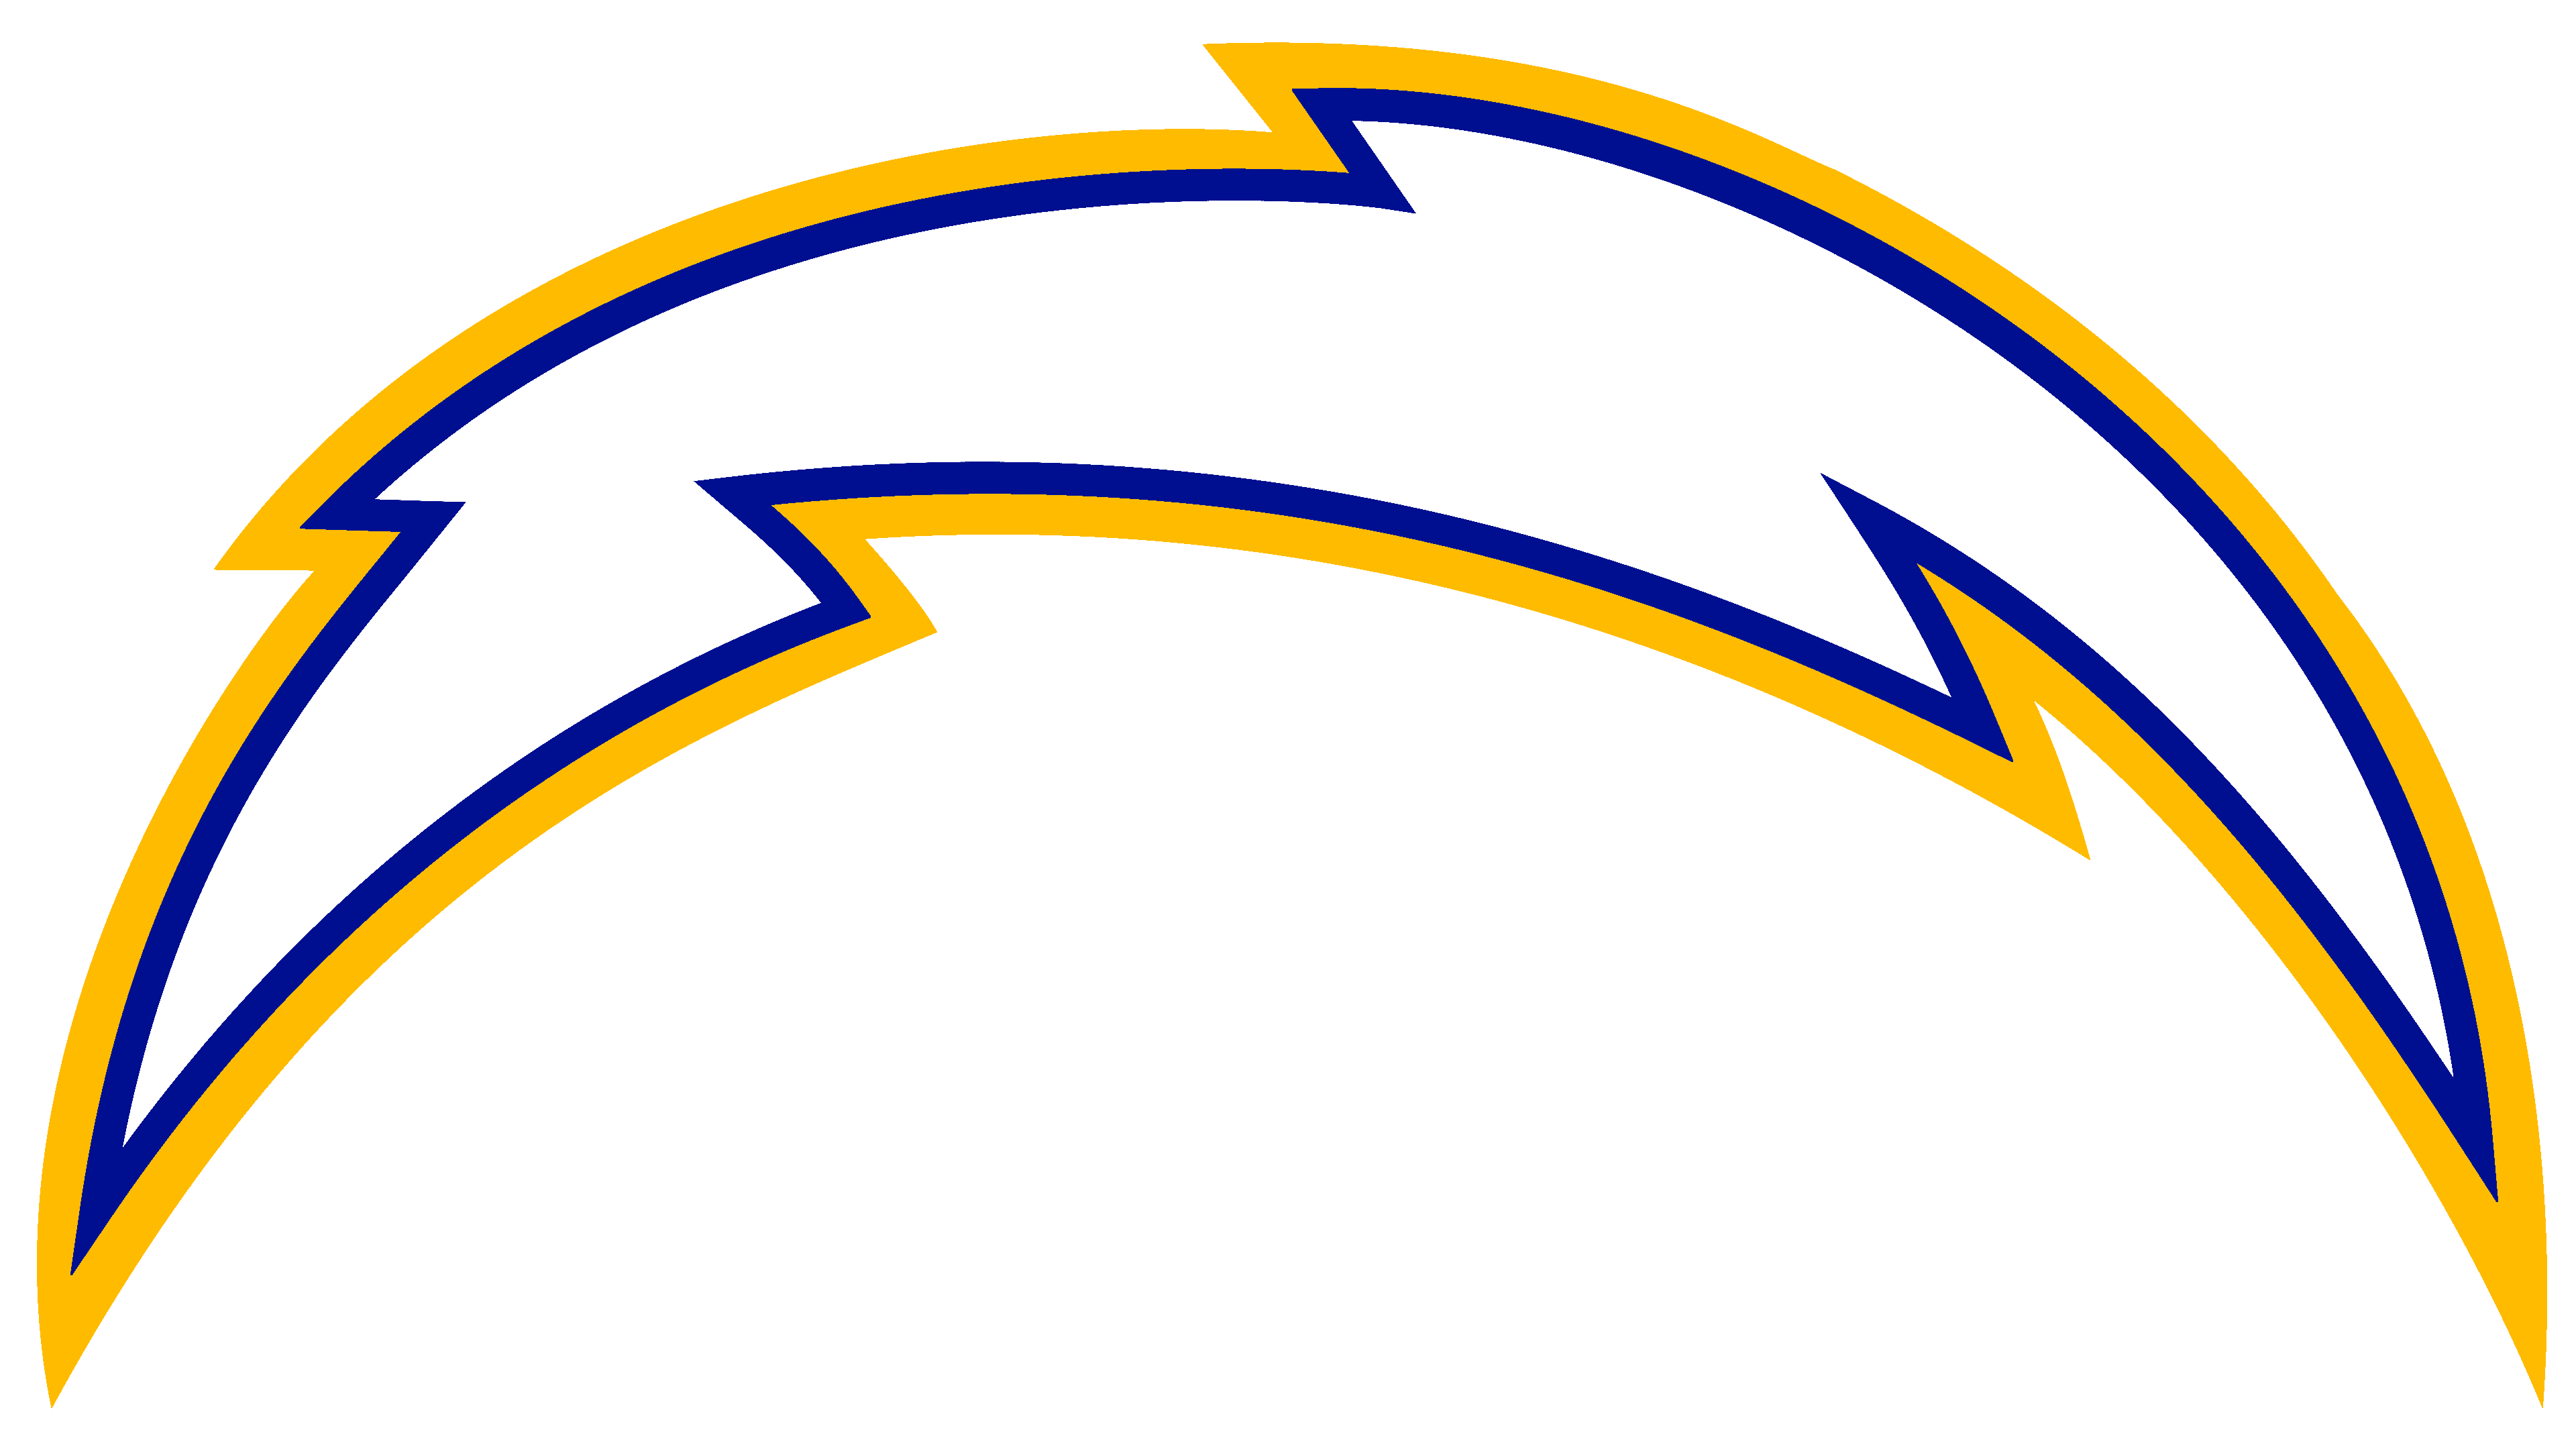 San Diego Chargers Logo and sign, new logo meaning and history